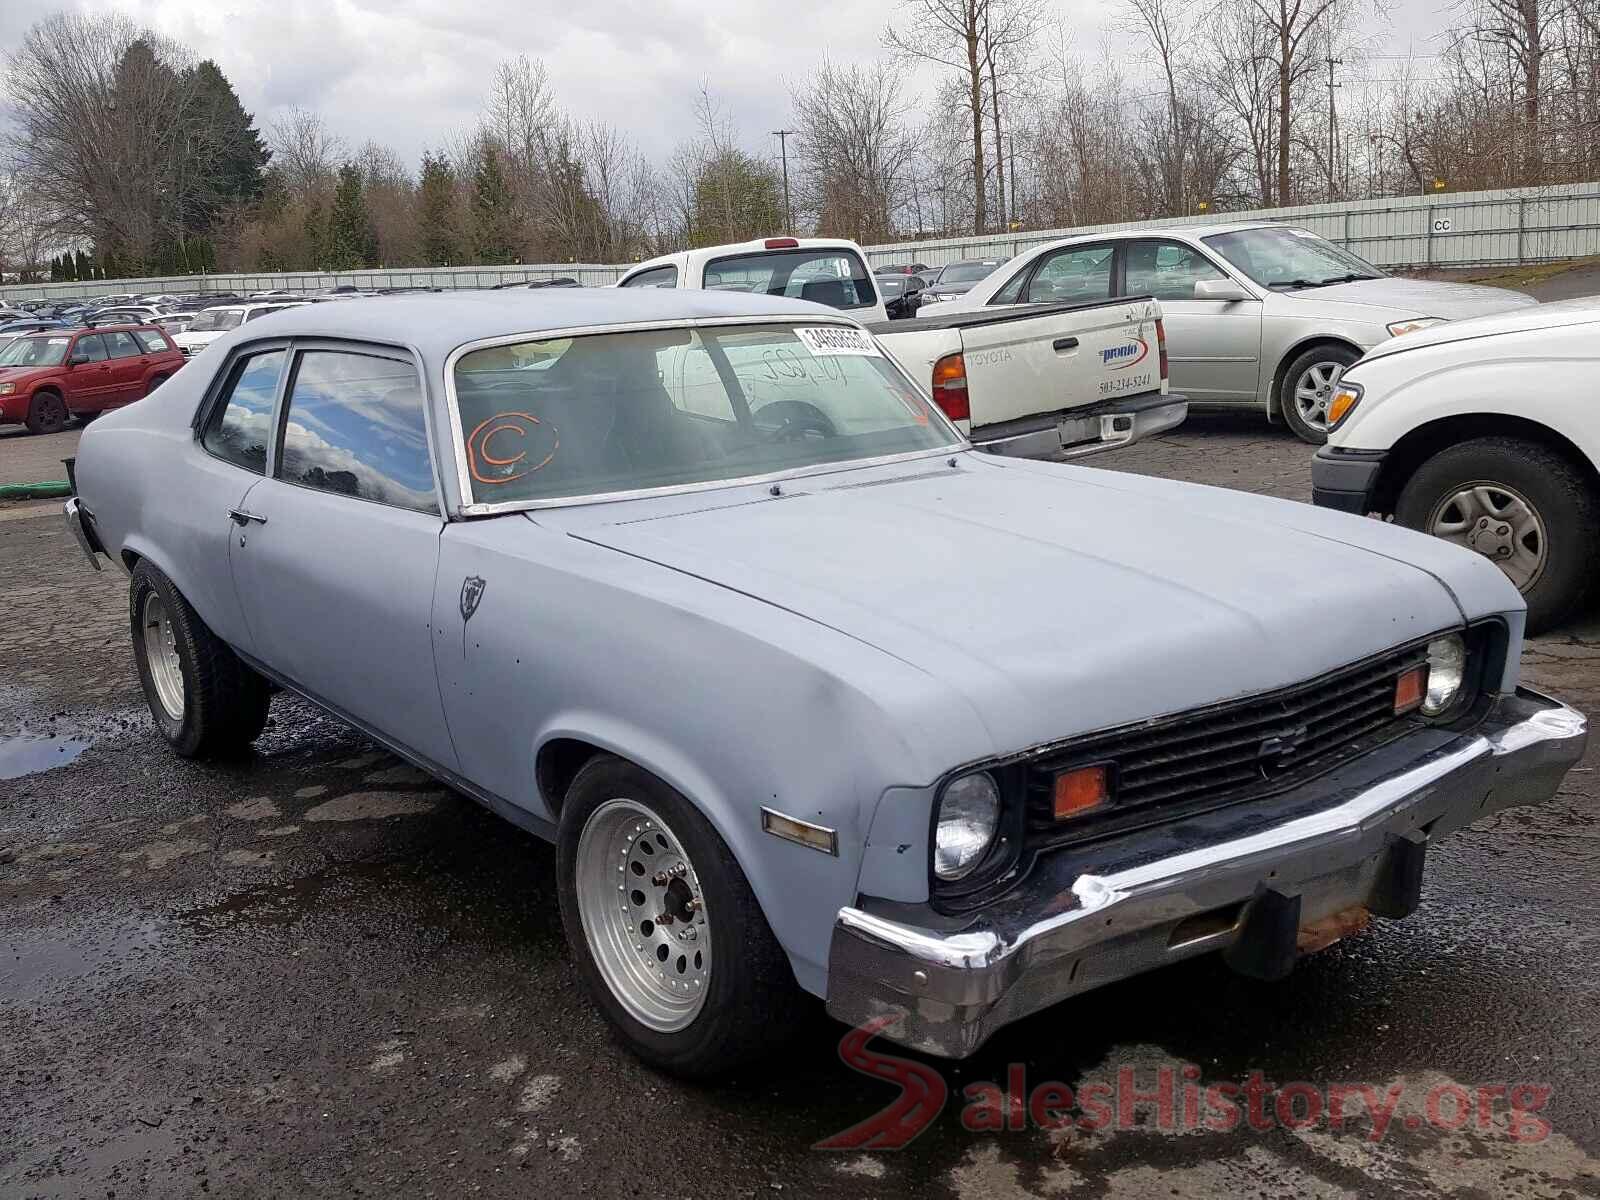 1X27L4L112537 1974 CHEVROLET ALL OTHER